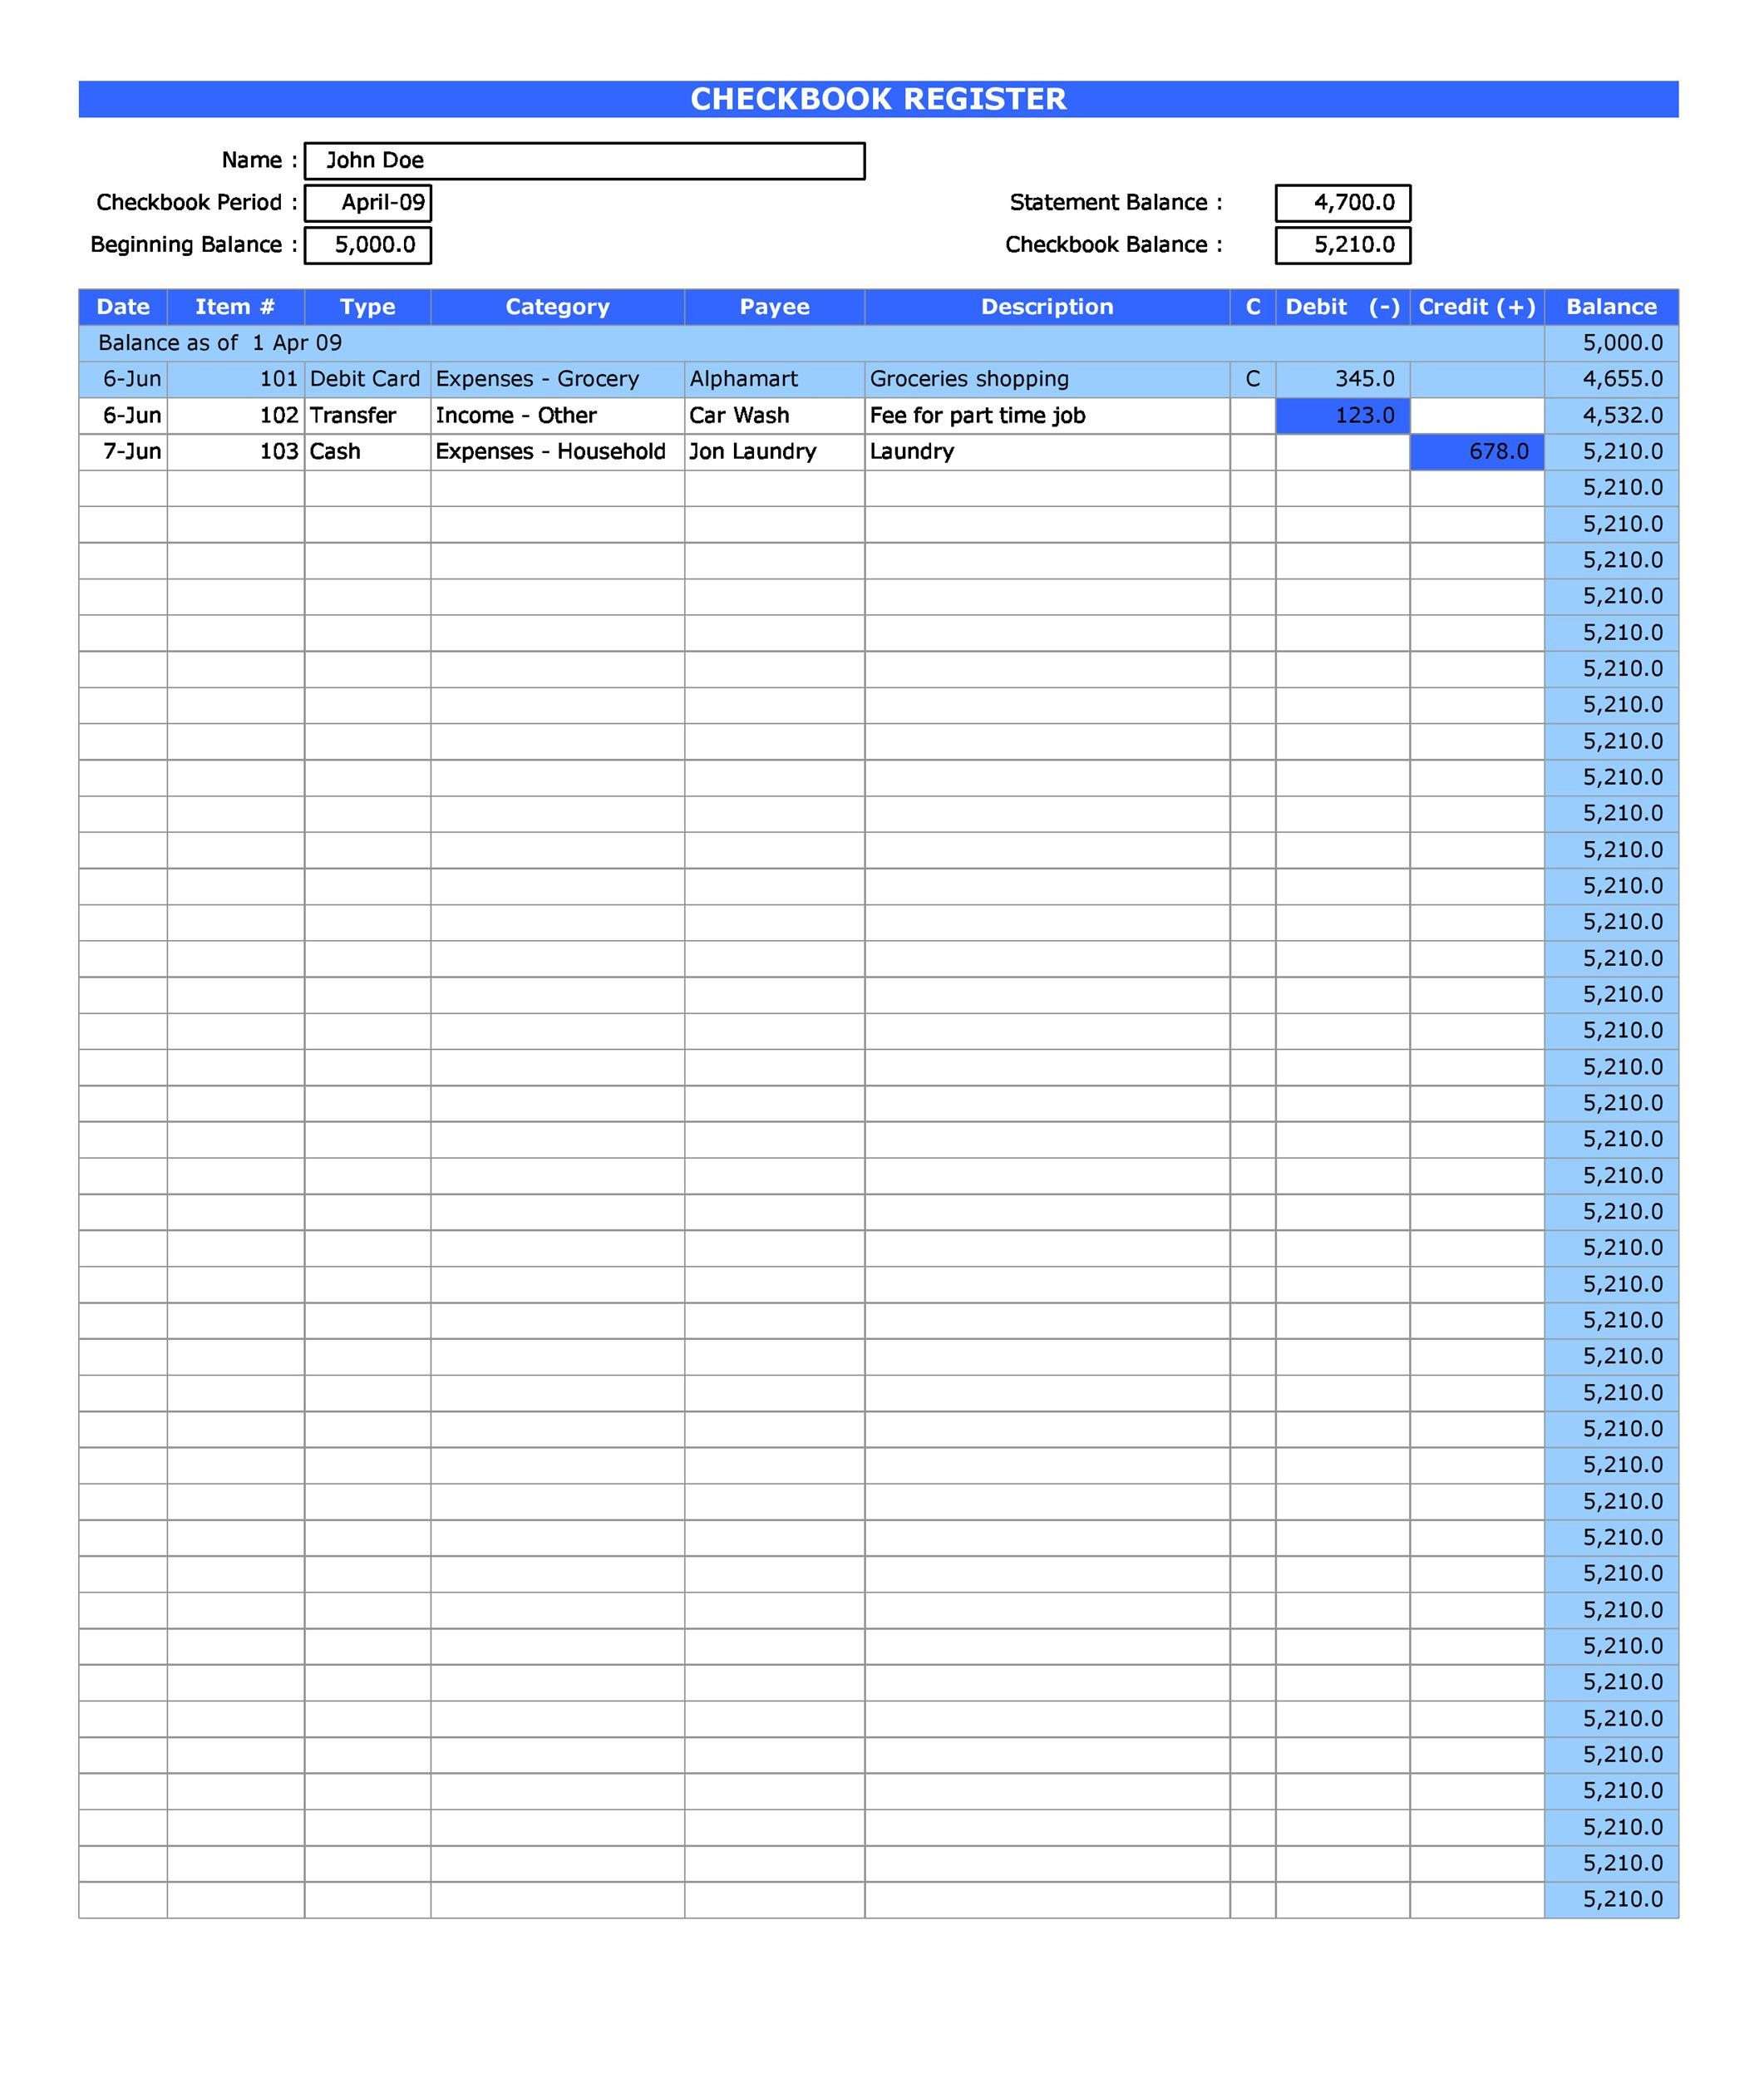 simple business credit application template excel